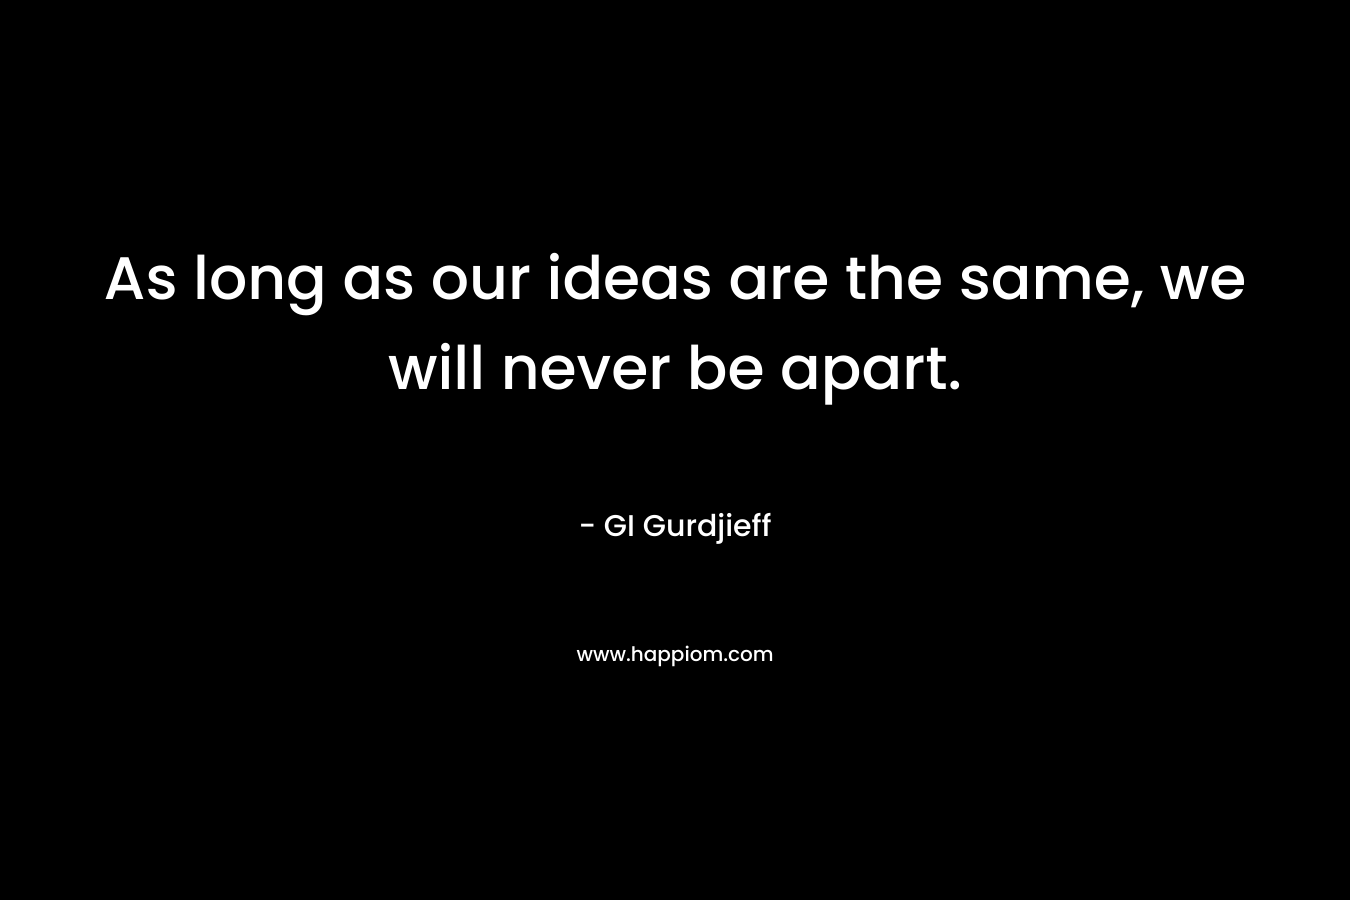 As long as our ideas are the same, we will never be apart.